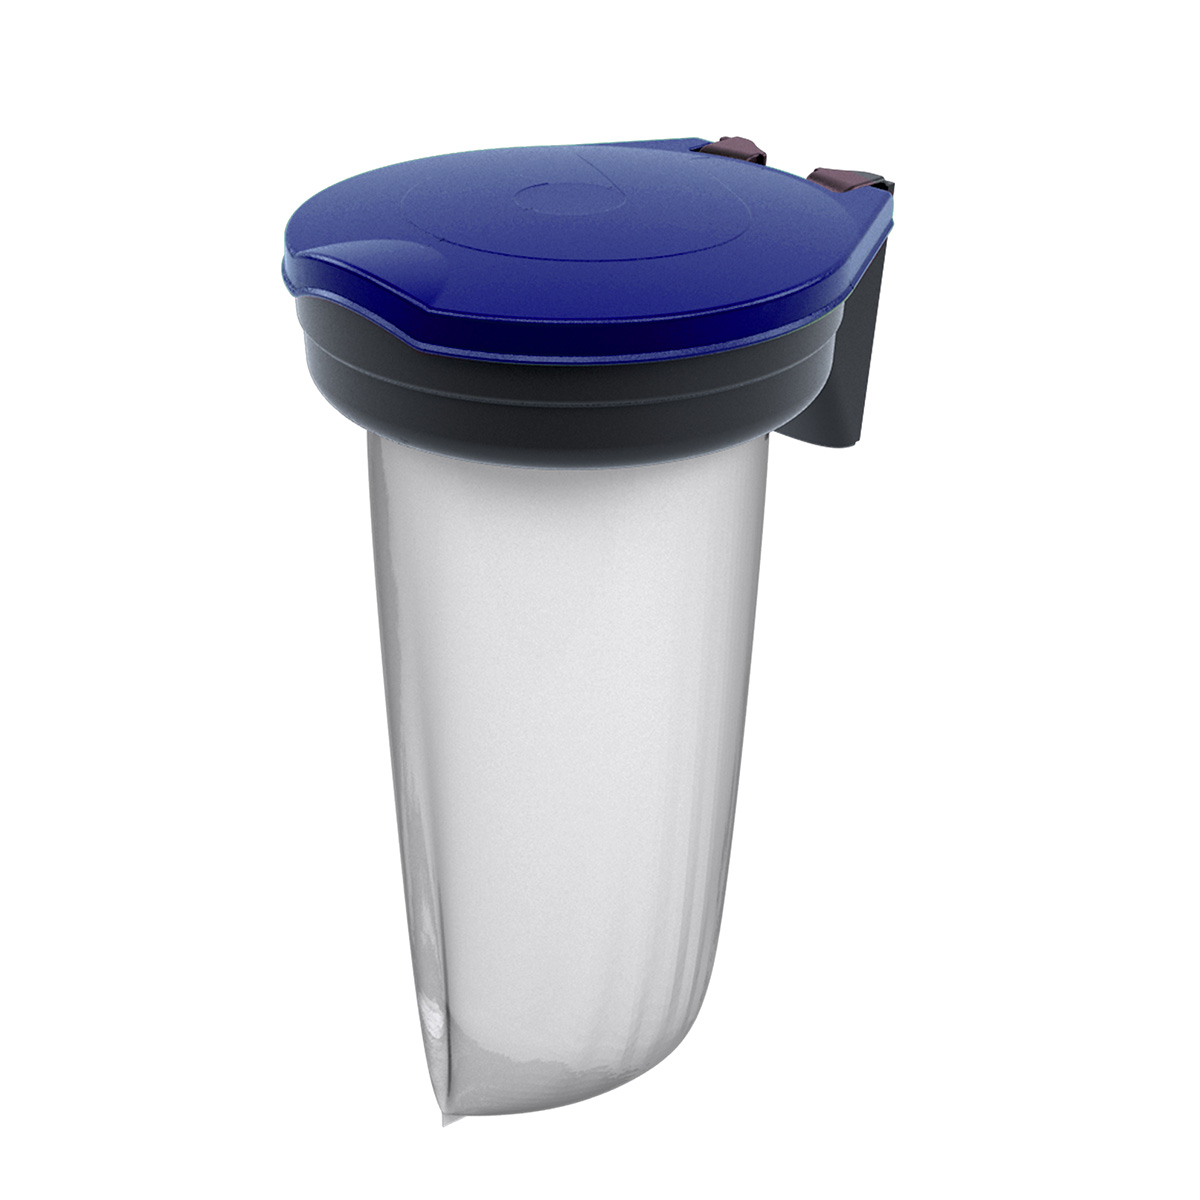 Skipper™ Barrier Recycling Bin With Blue Lid - Accepts Standard Size Bin Bags or Liners